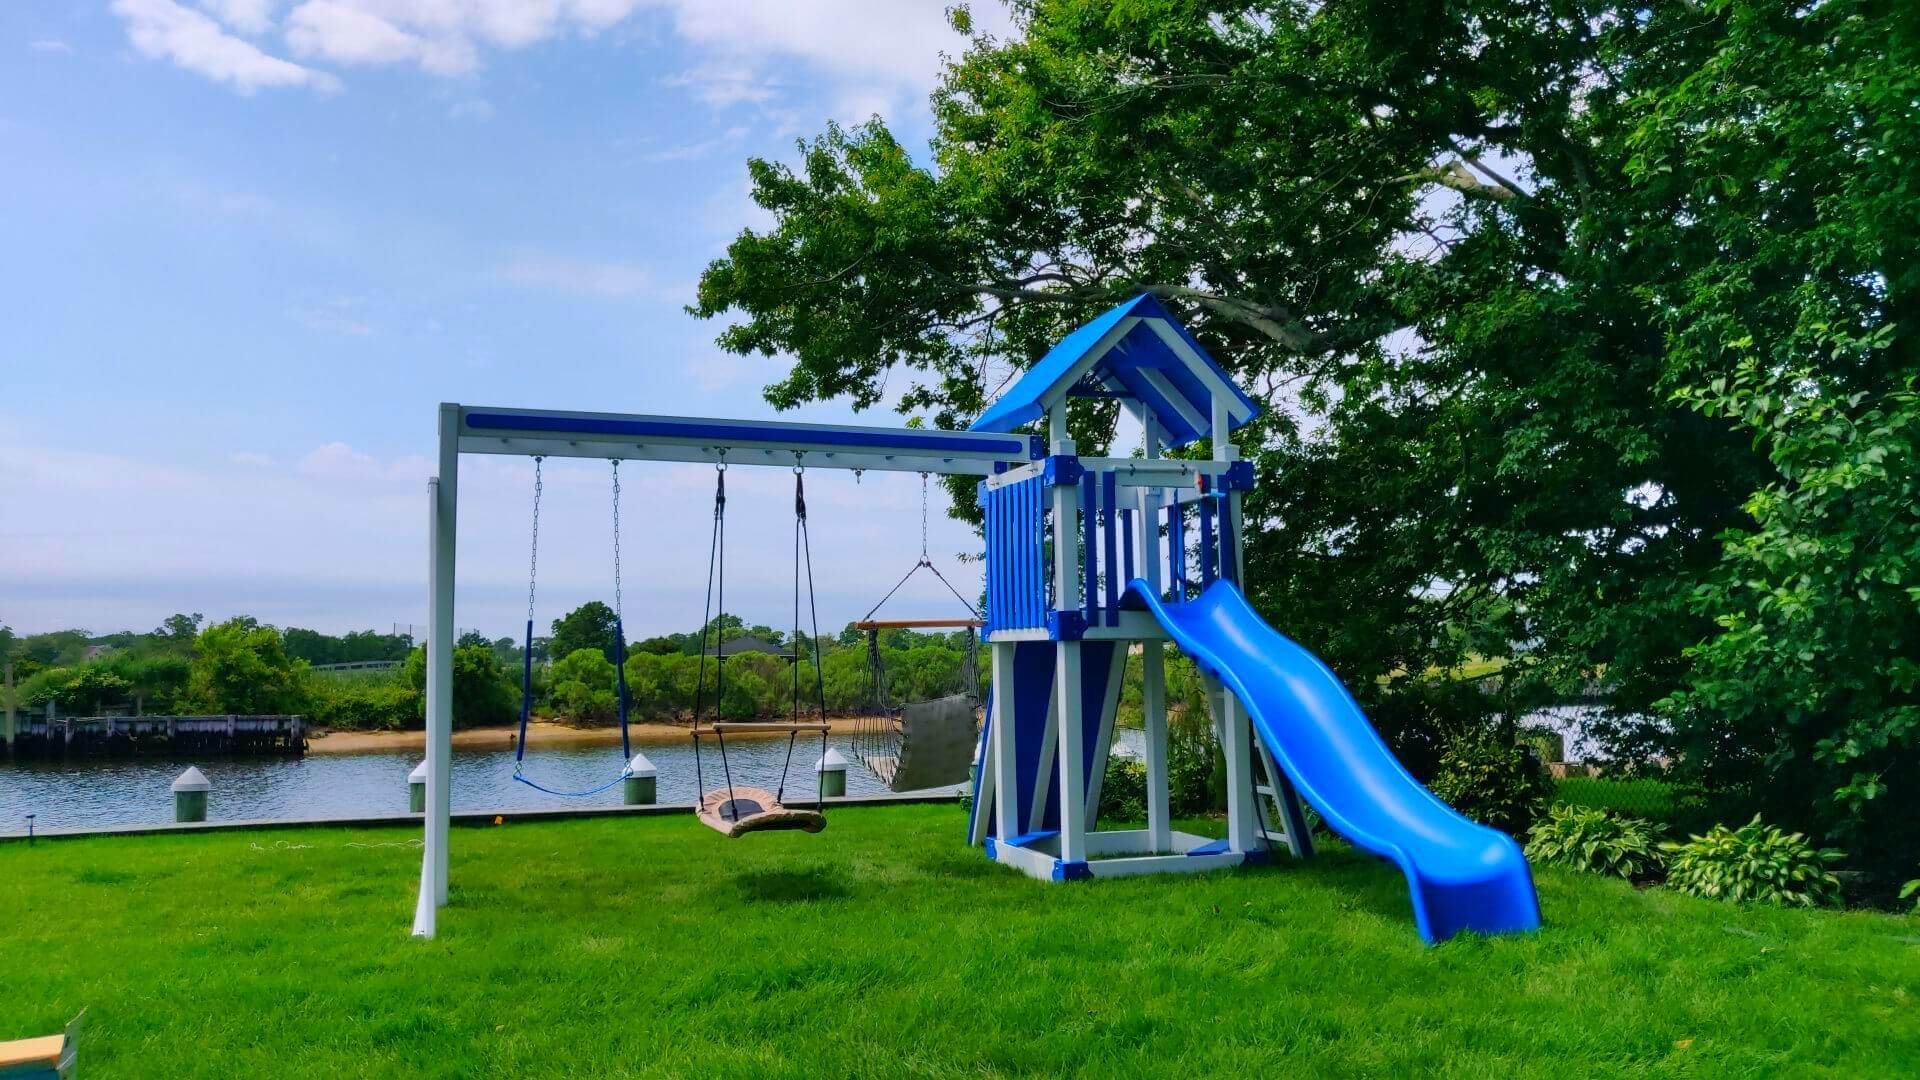 Blue playset with various swing add-ons